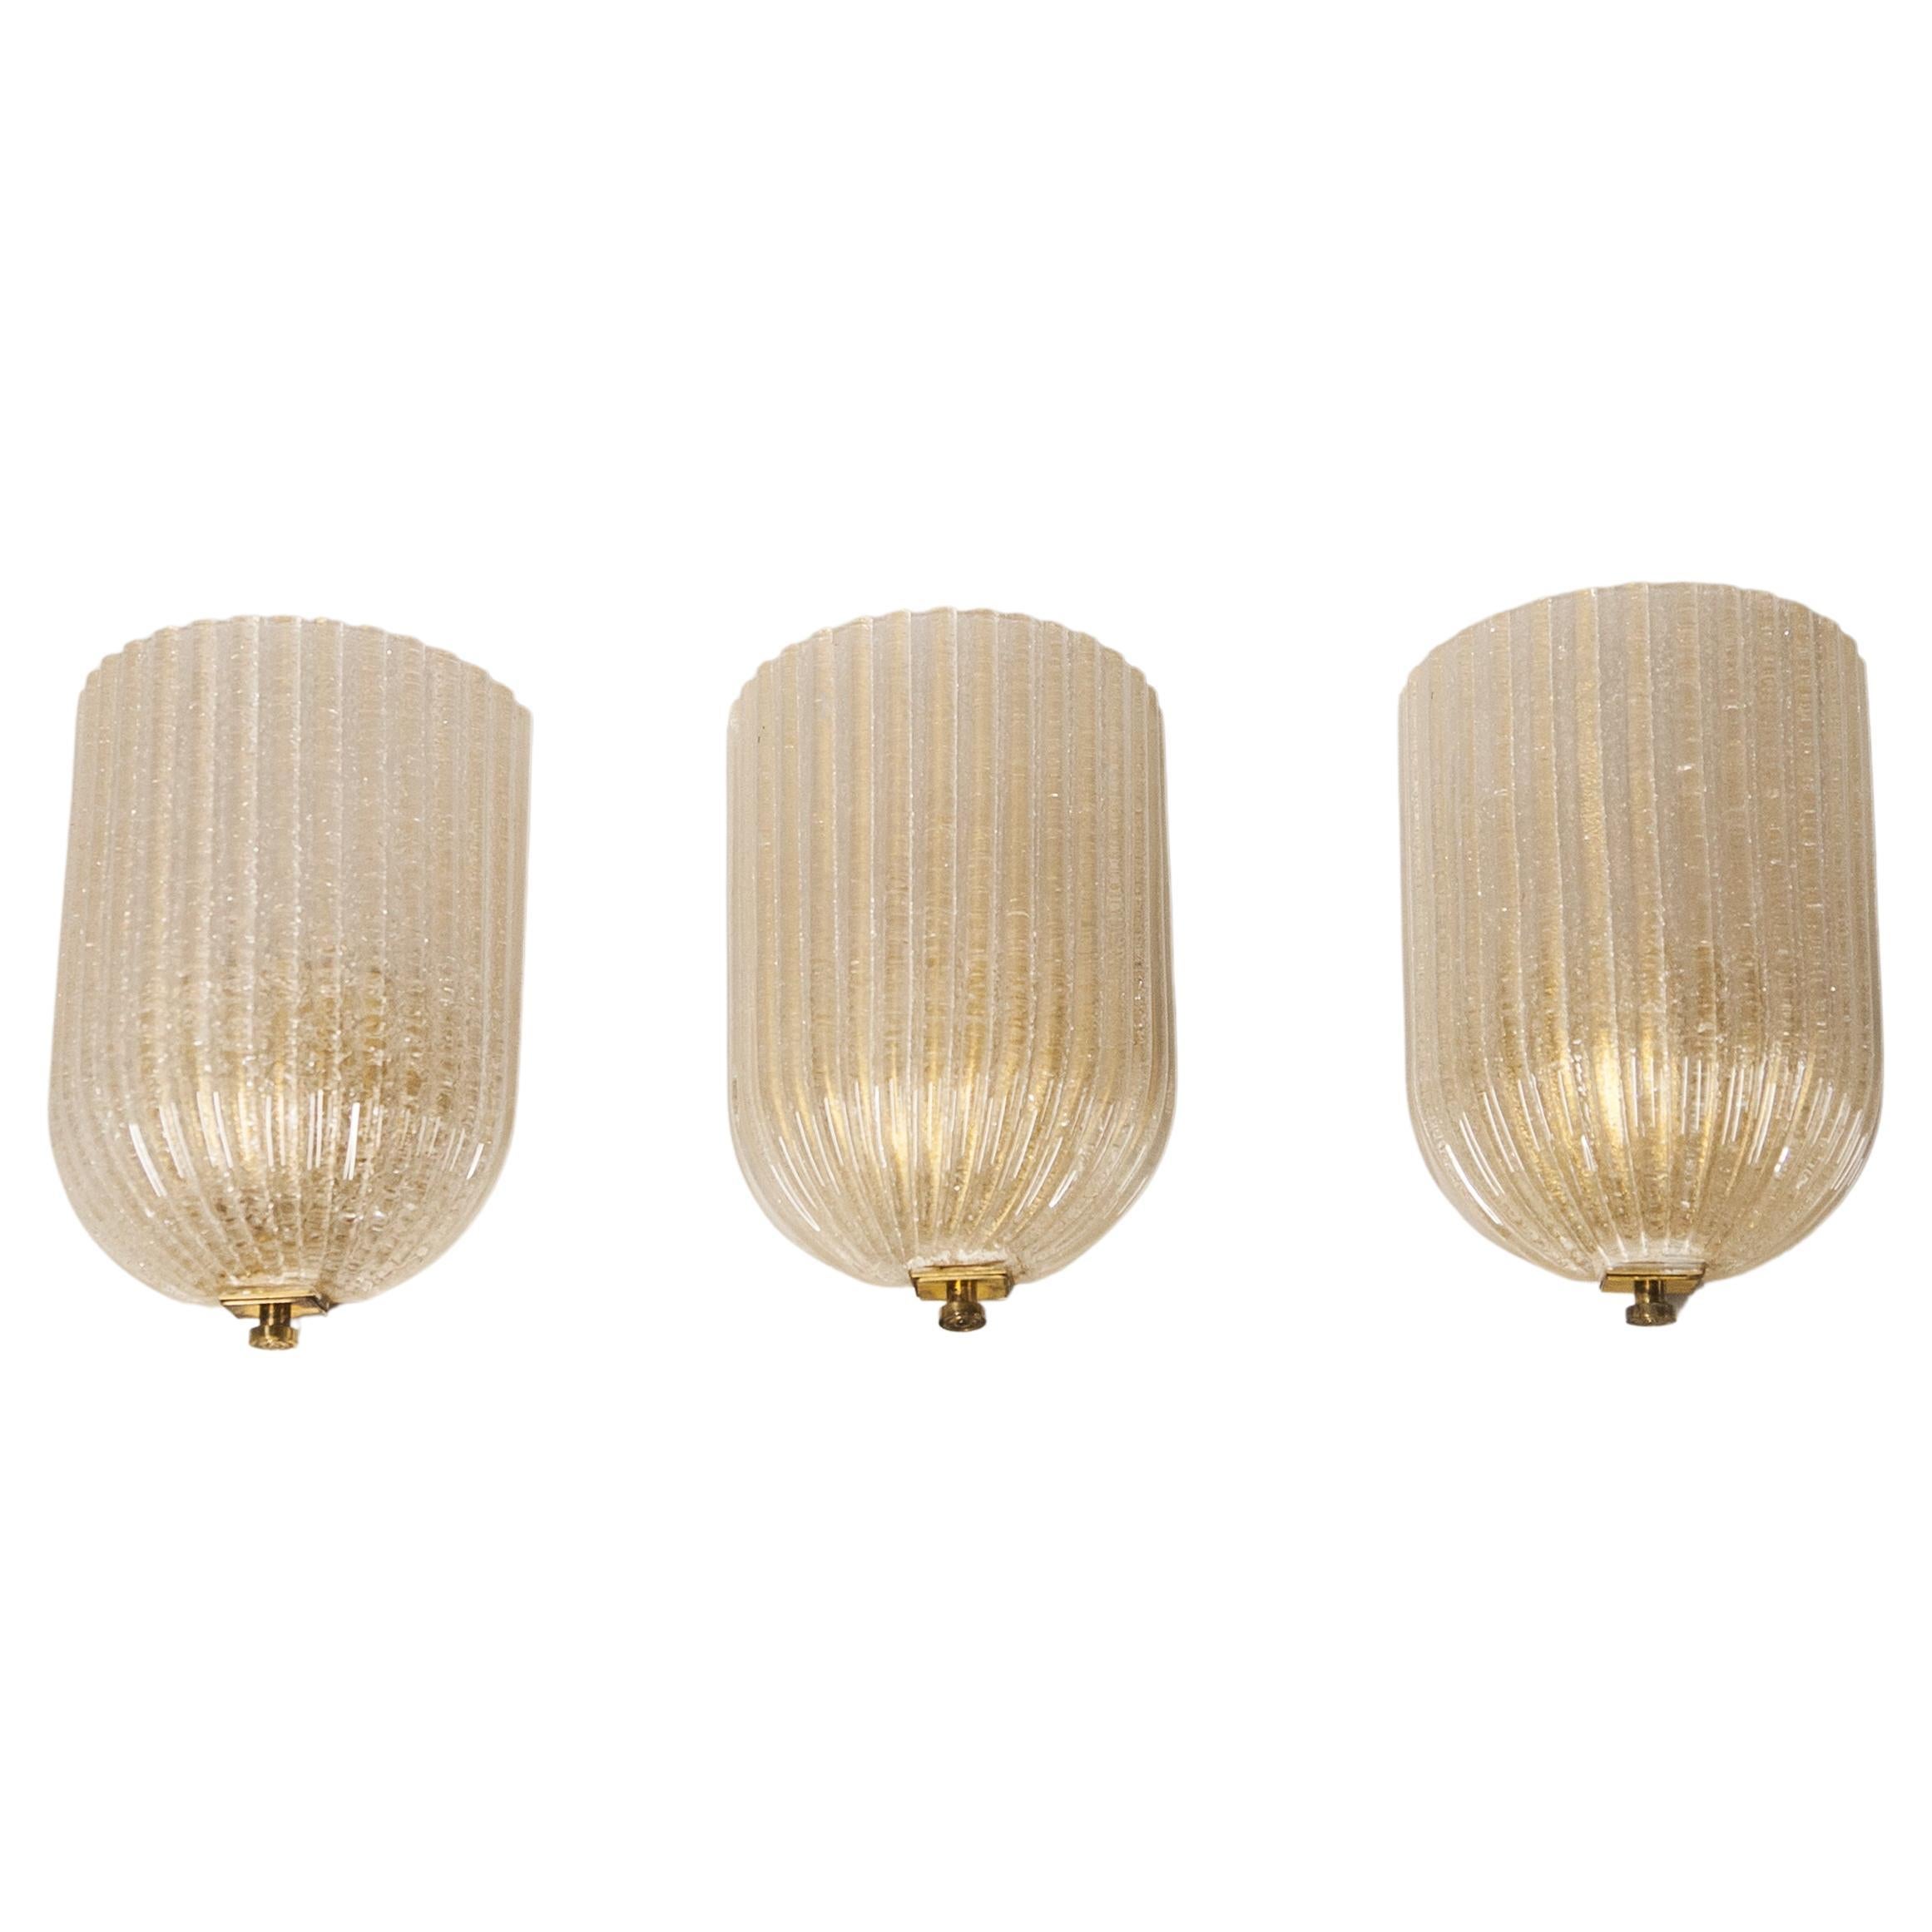 Barovier Wall Lights and Sconces